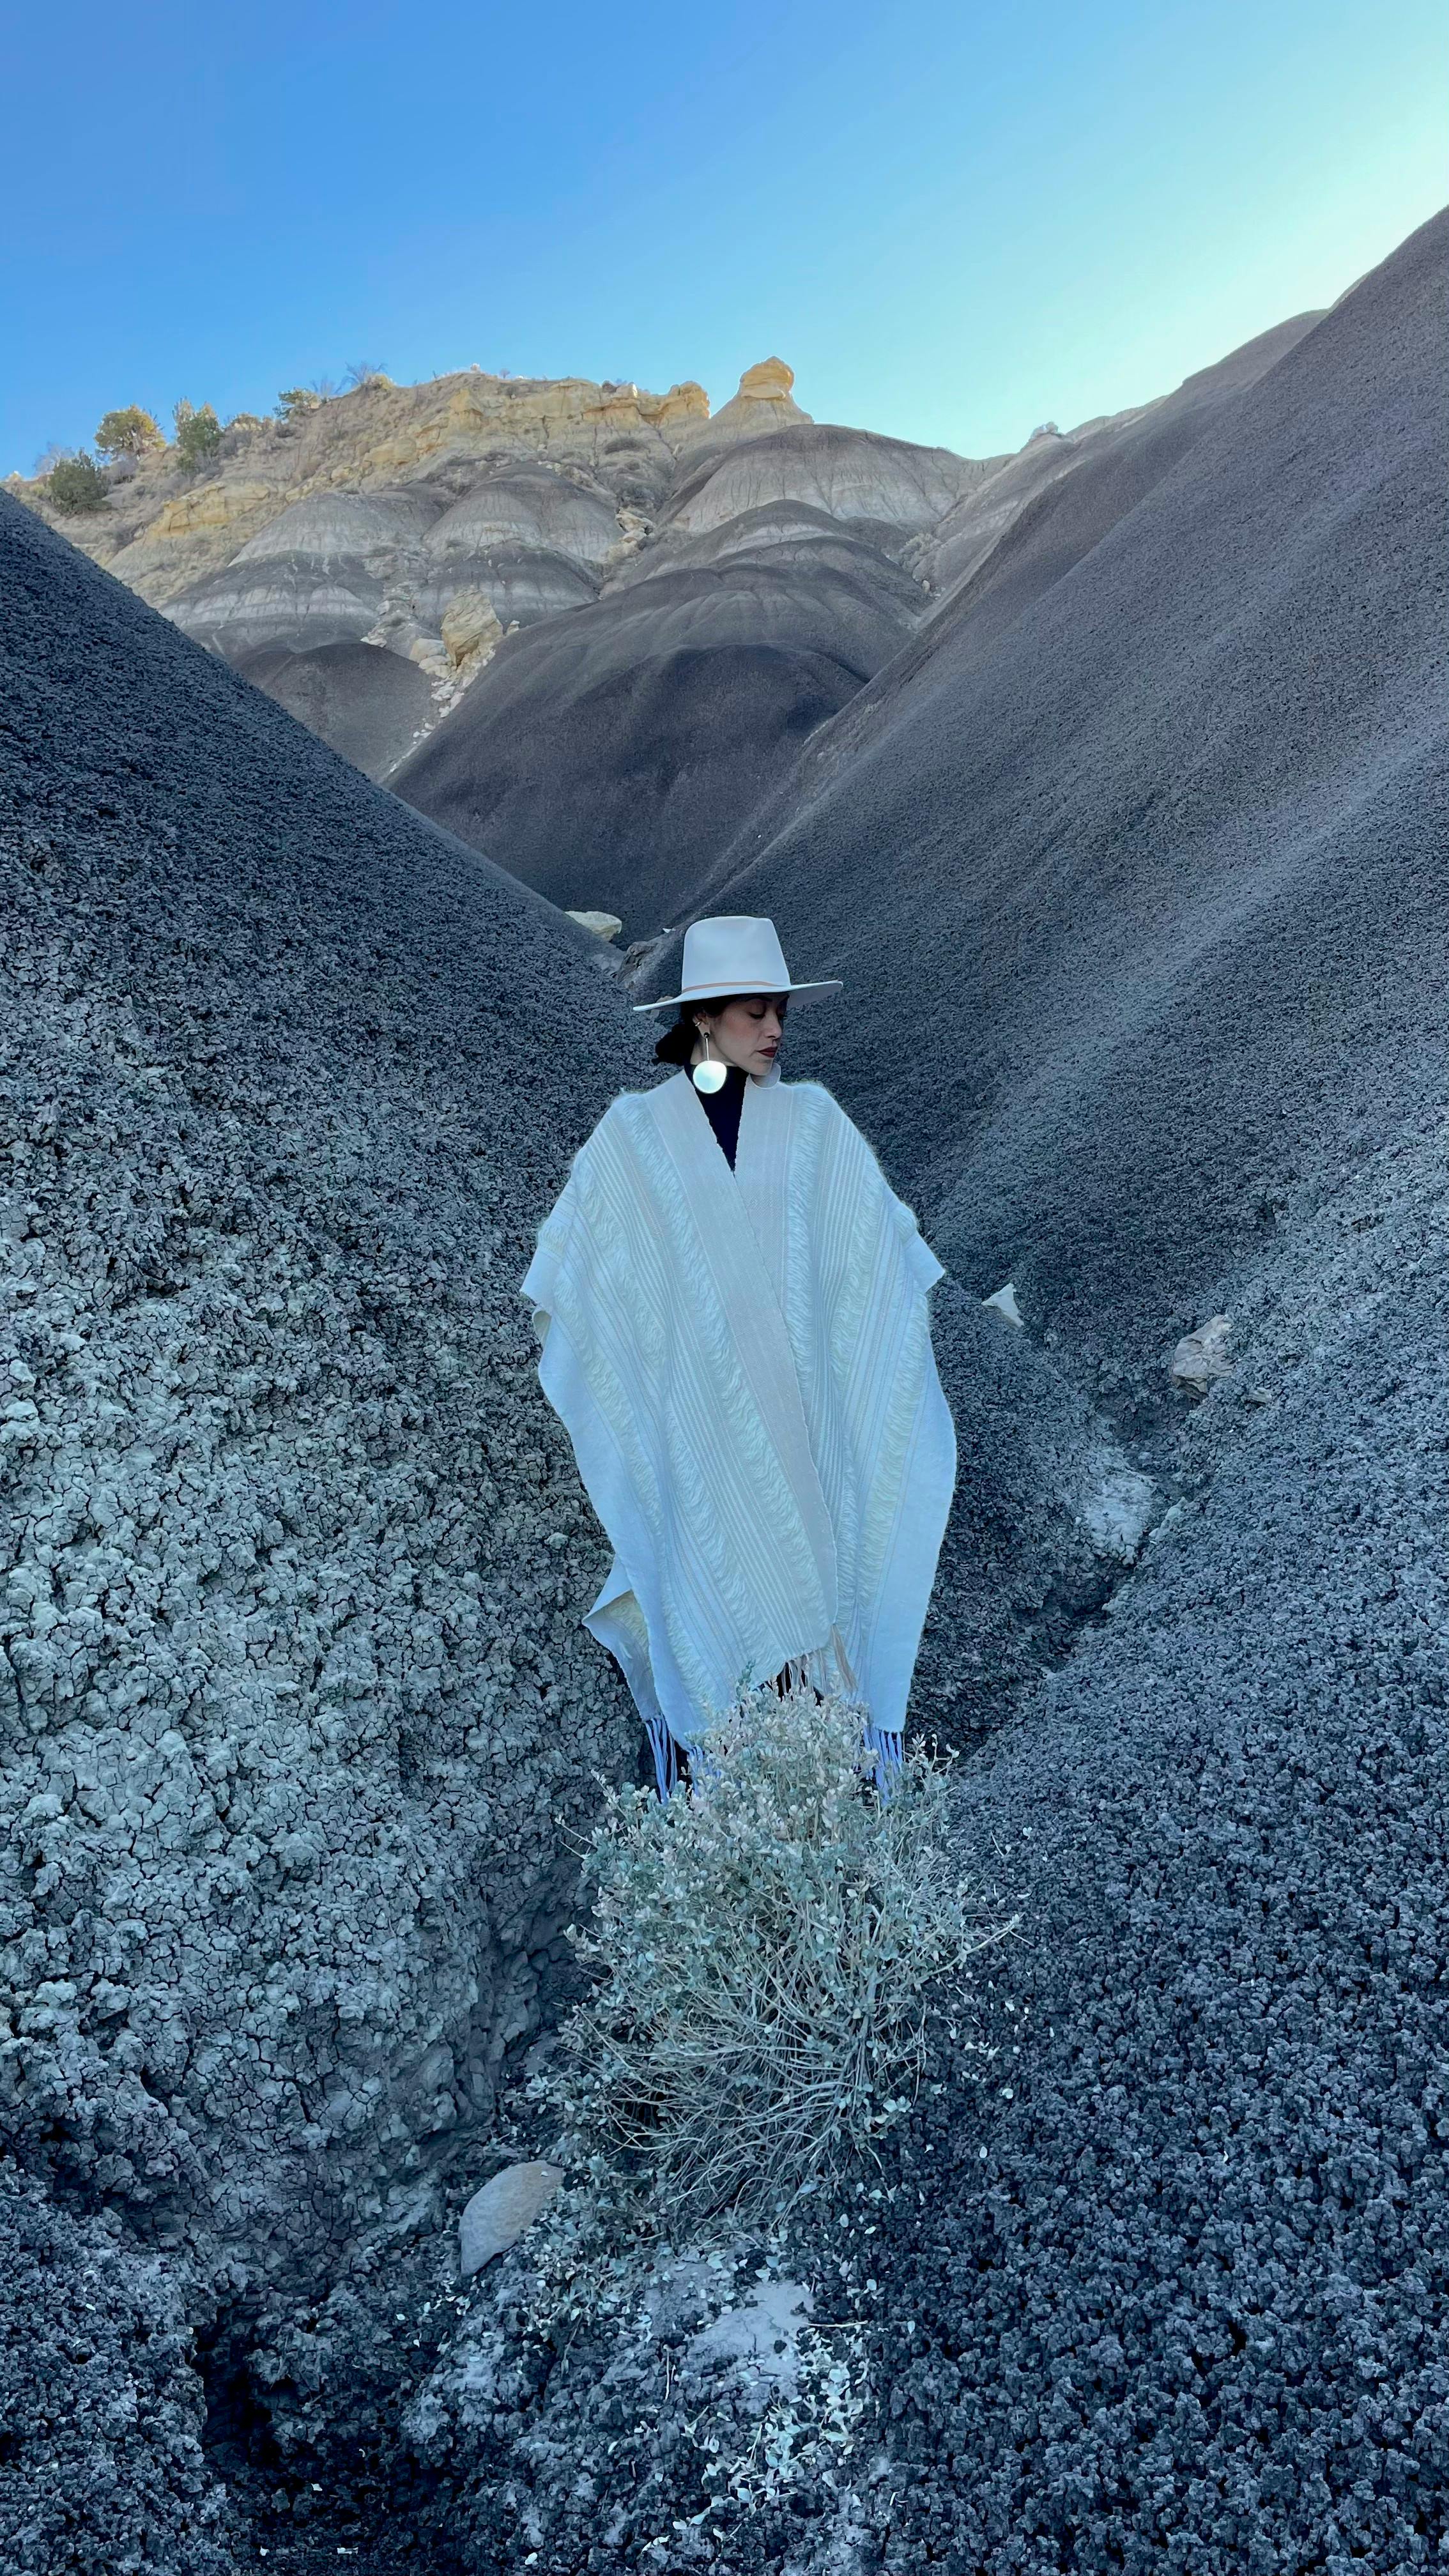 textile artist rhiannon griego in fashionable white poncho and hat posing in desert canyon at dusk